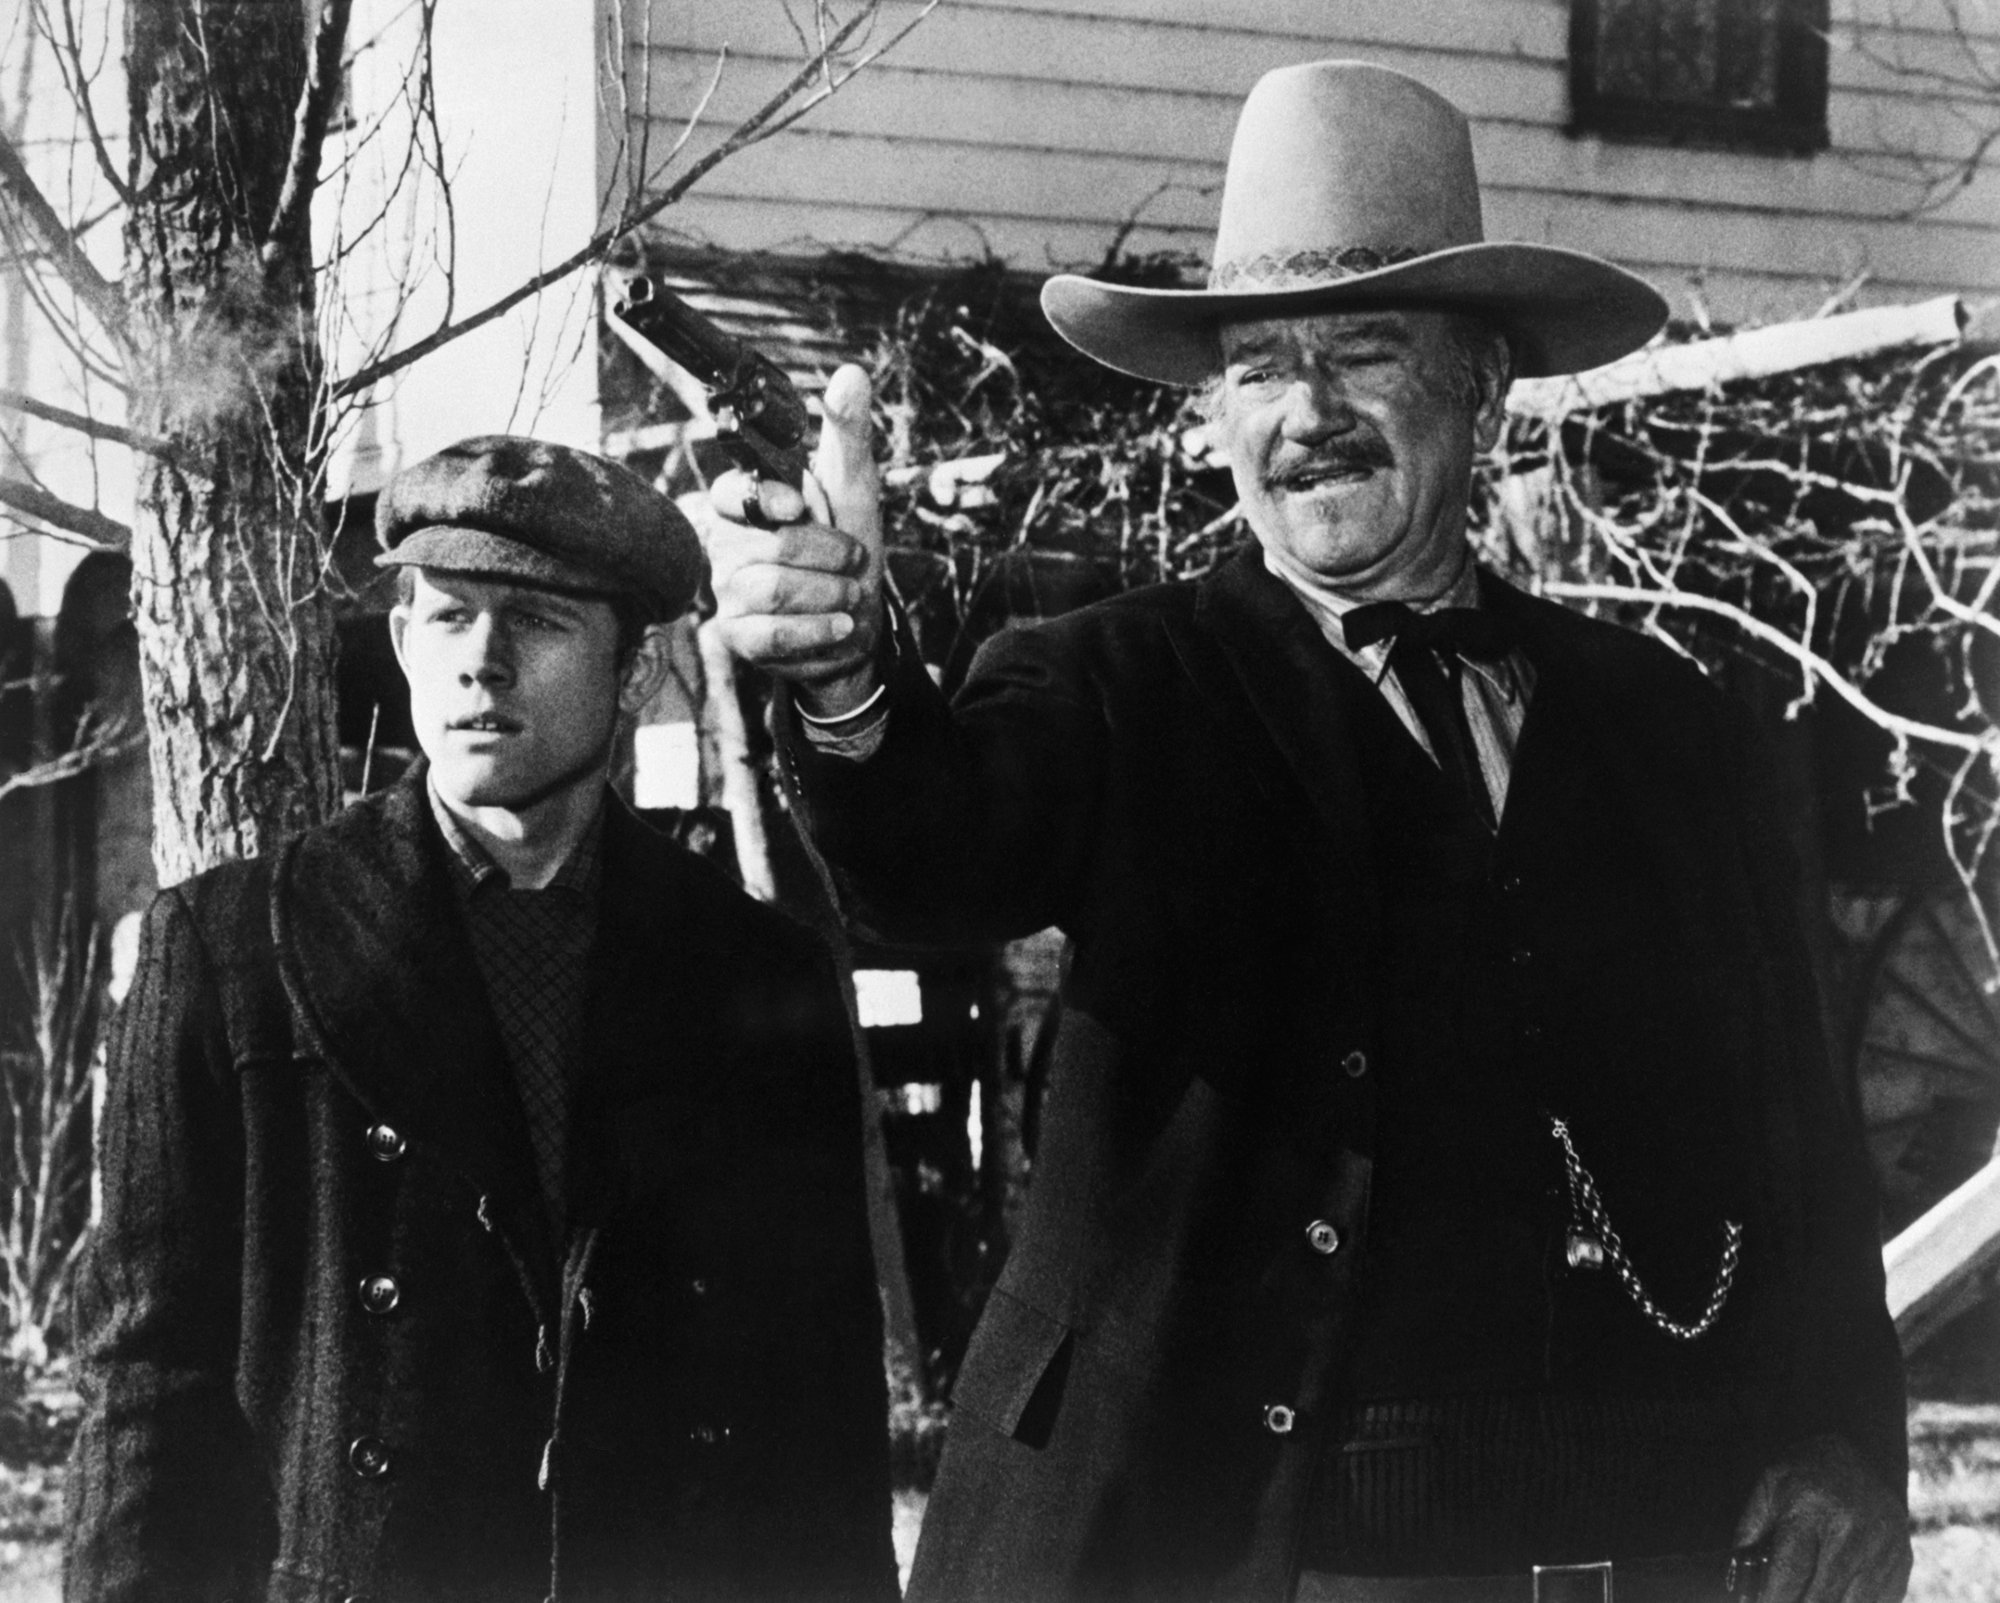 John Wayne in one of his last movies 'The Shootist' alongside Ron Howard. He's wearing a Western outfit and holding a gun, pointing it out standing next to a stunned Howard.